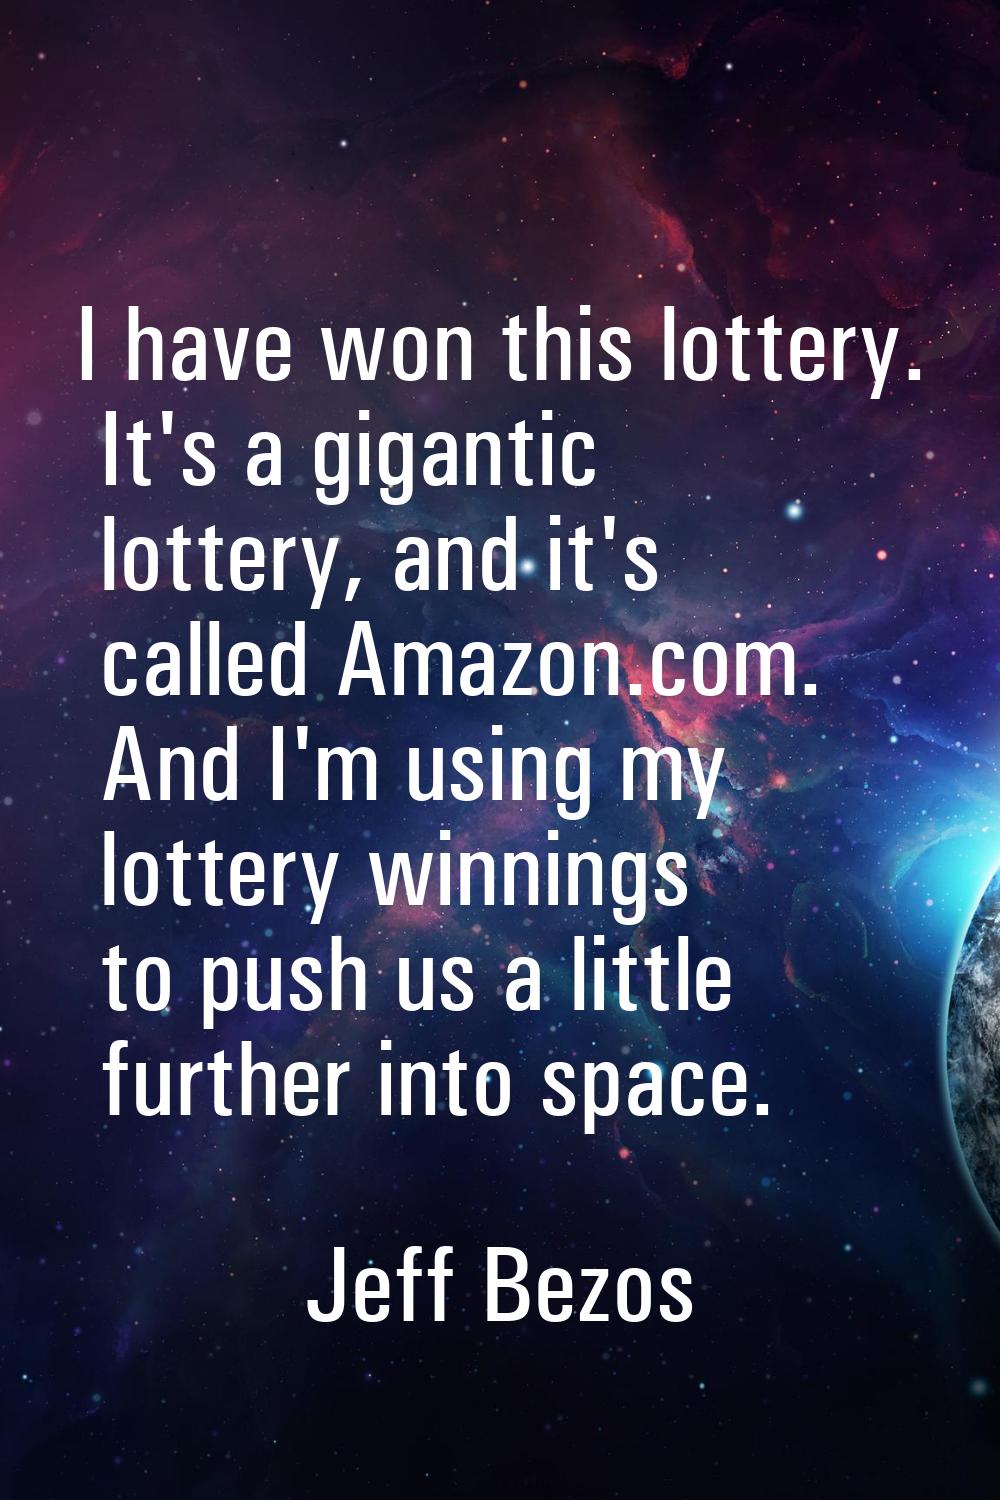 I have won this lottery. It's a gigantic lottery, and it's called Amazon.com. And I'm using my lott